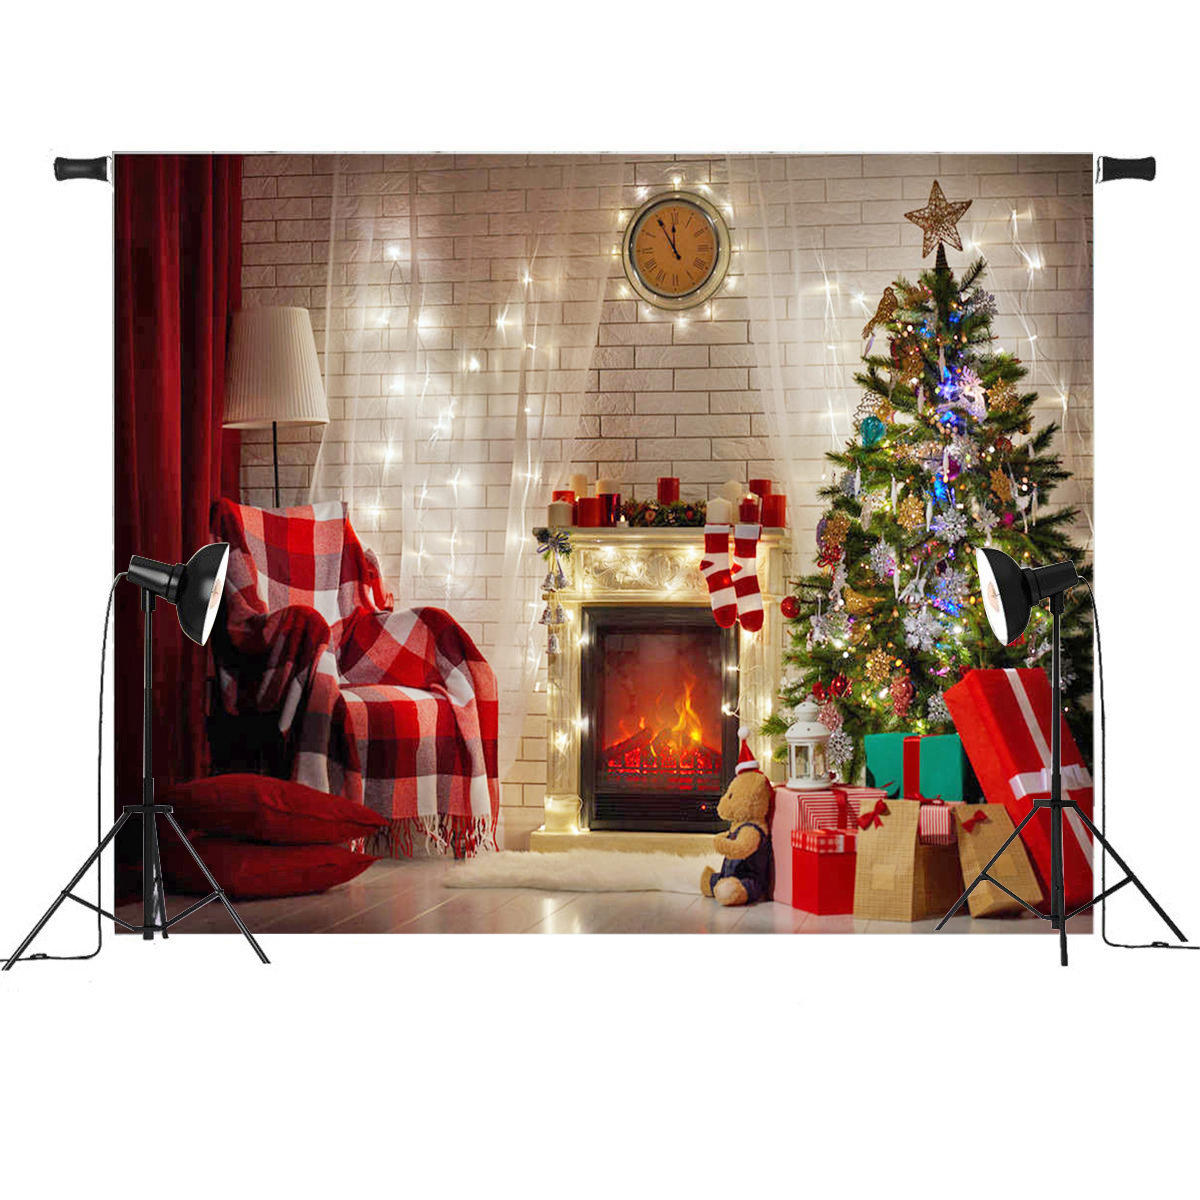 Bucks Fireplace Elegant 7x5ft Red Christmas Tree Gift Chair Fireplace Graphy Backdrop Studio Prop Background